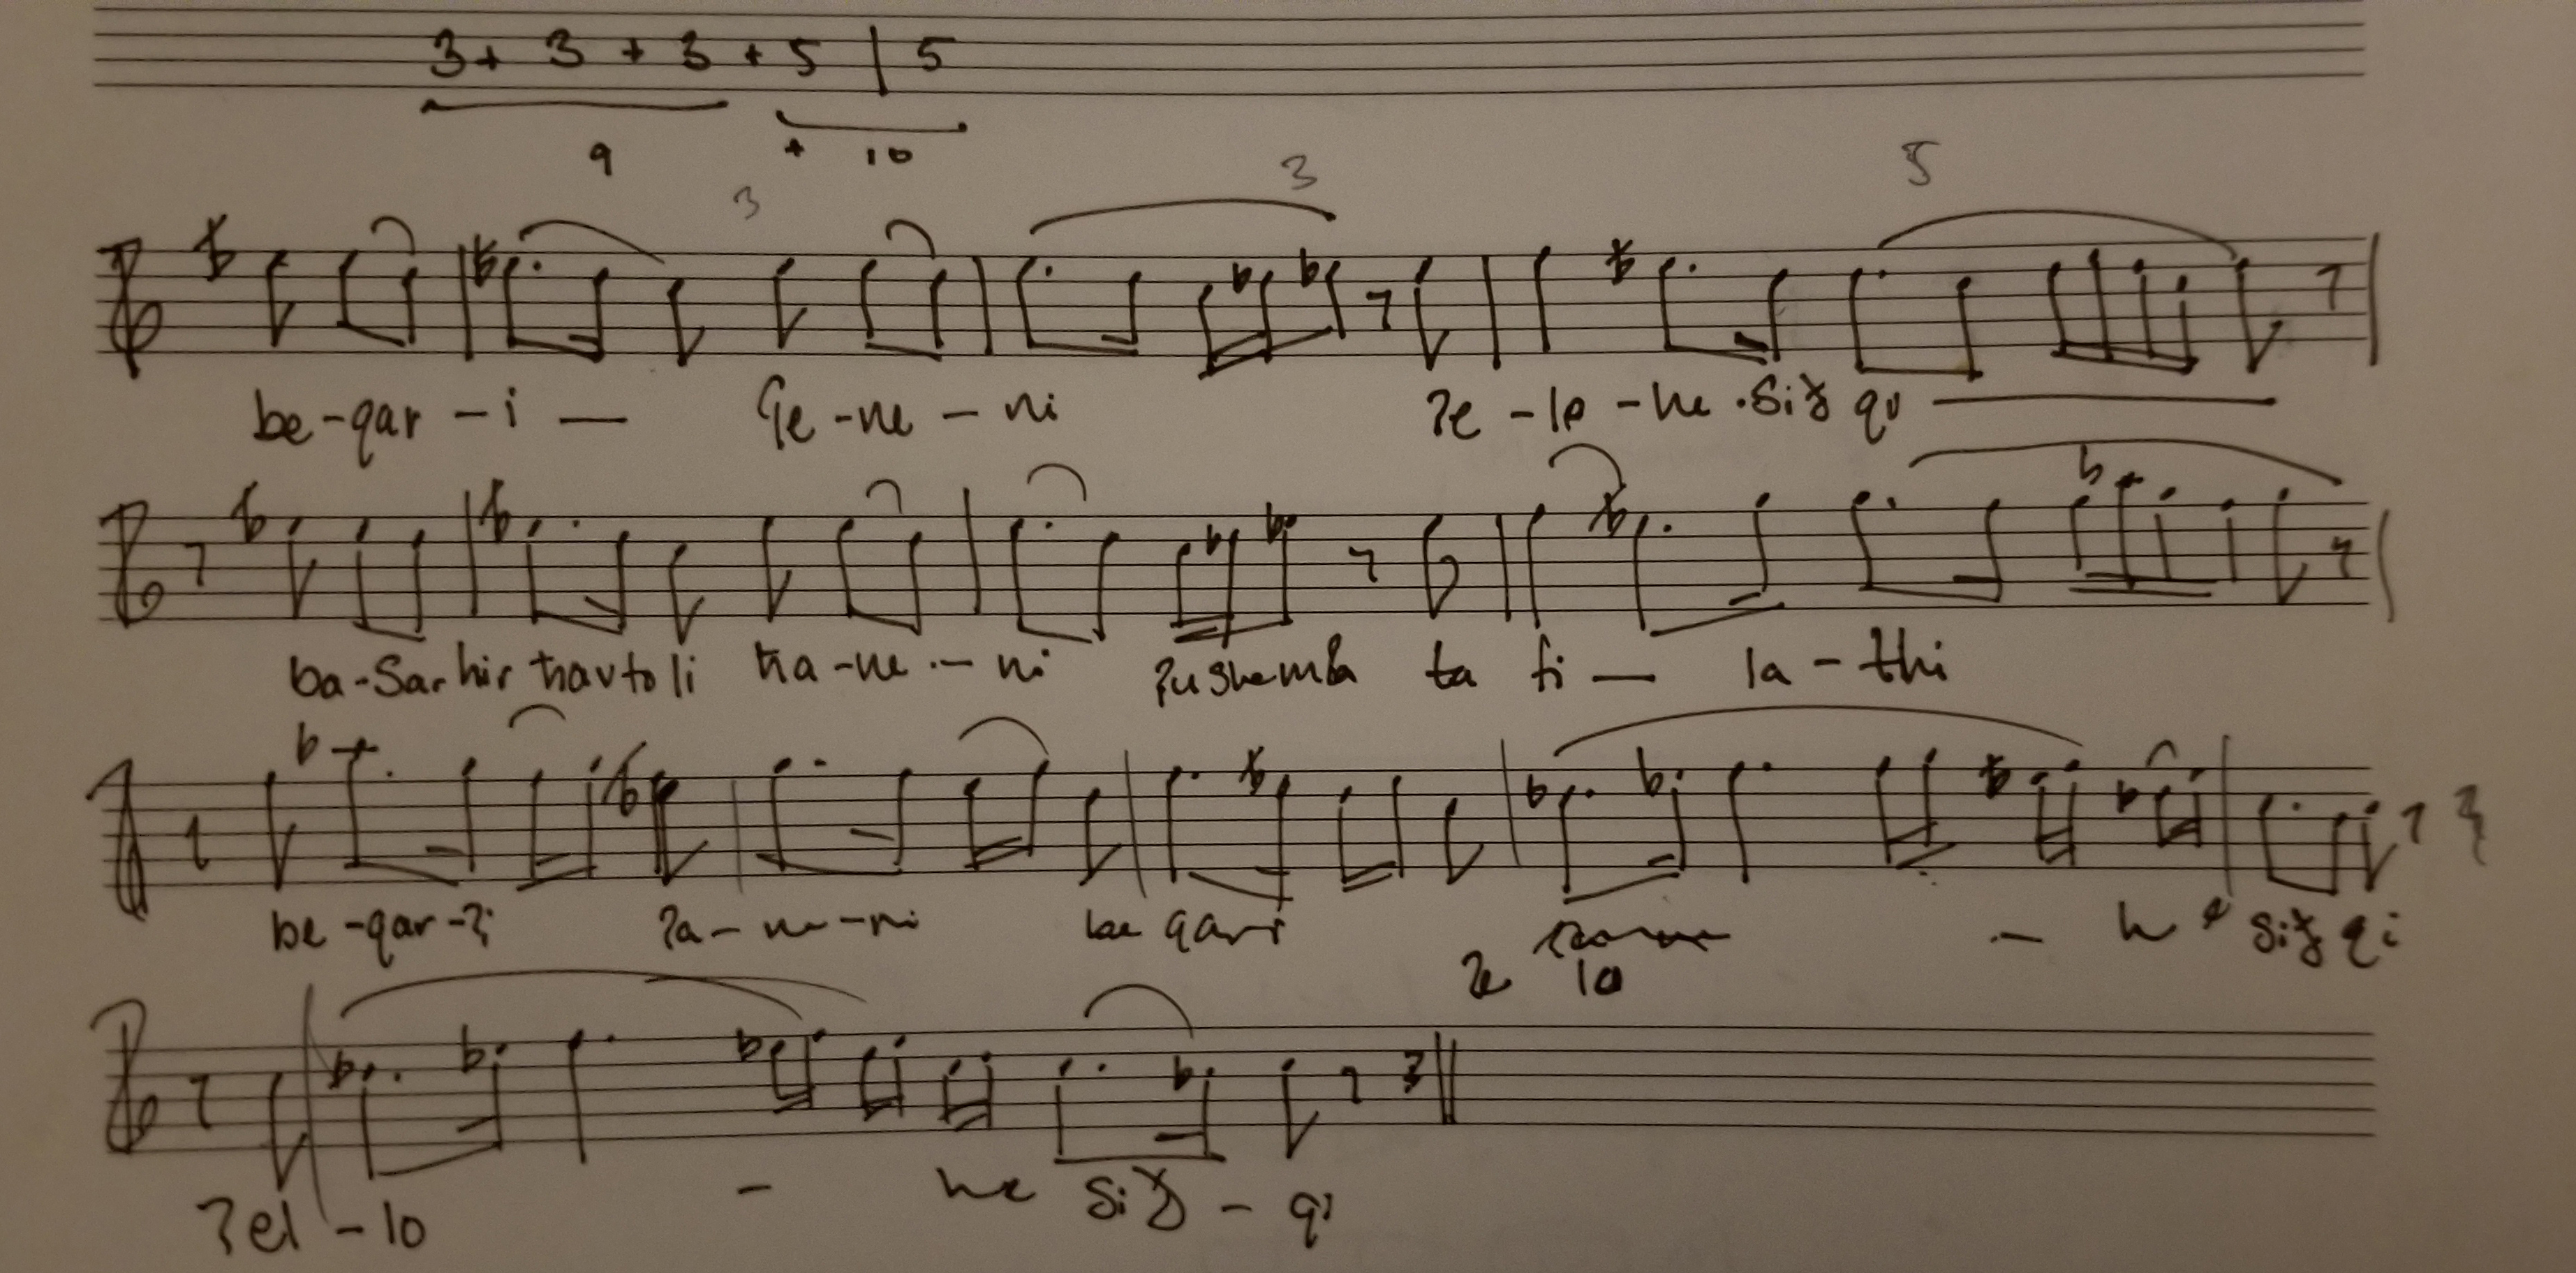 A score sample showing a melody transcribed into Western staff notation.